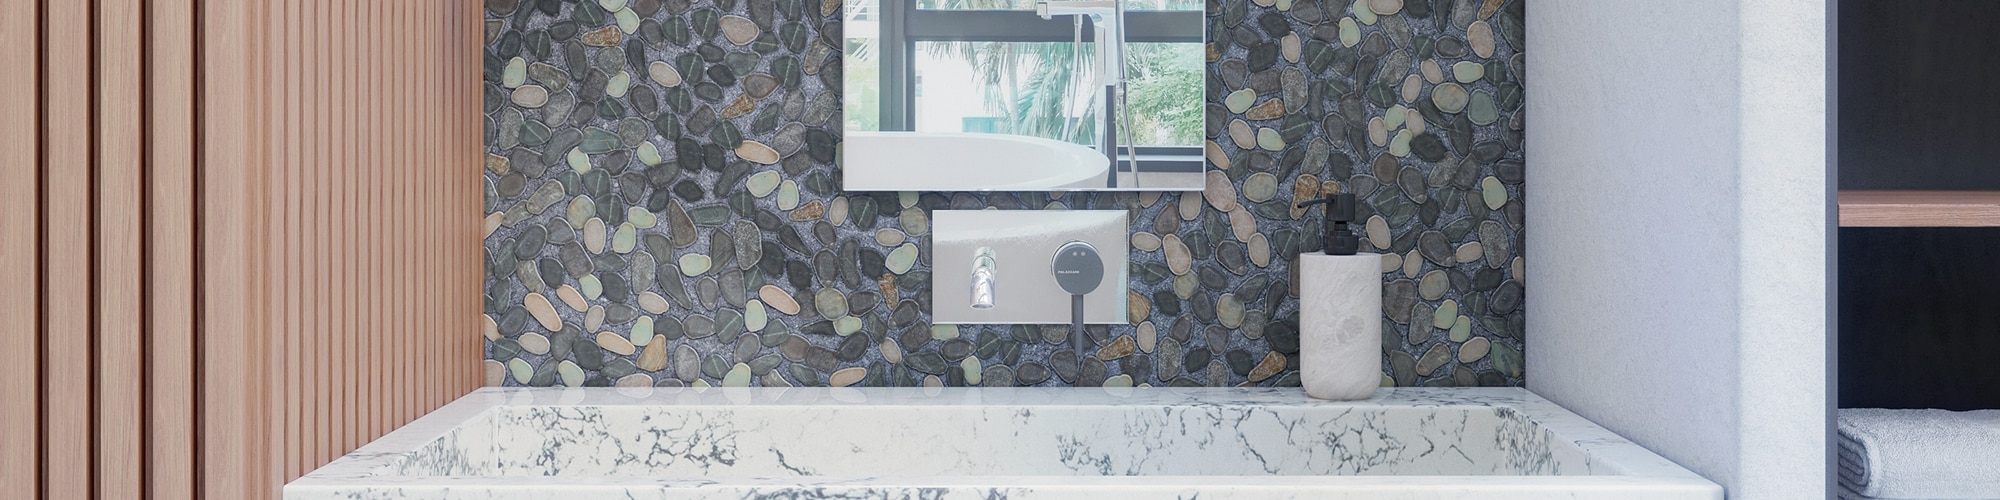 Bathroom vanity with gray pebble mosaic backsplash, mirror, polished silver wall-mounted faucet, white & gray quartz sink, and stone soap dispenser. 